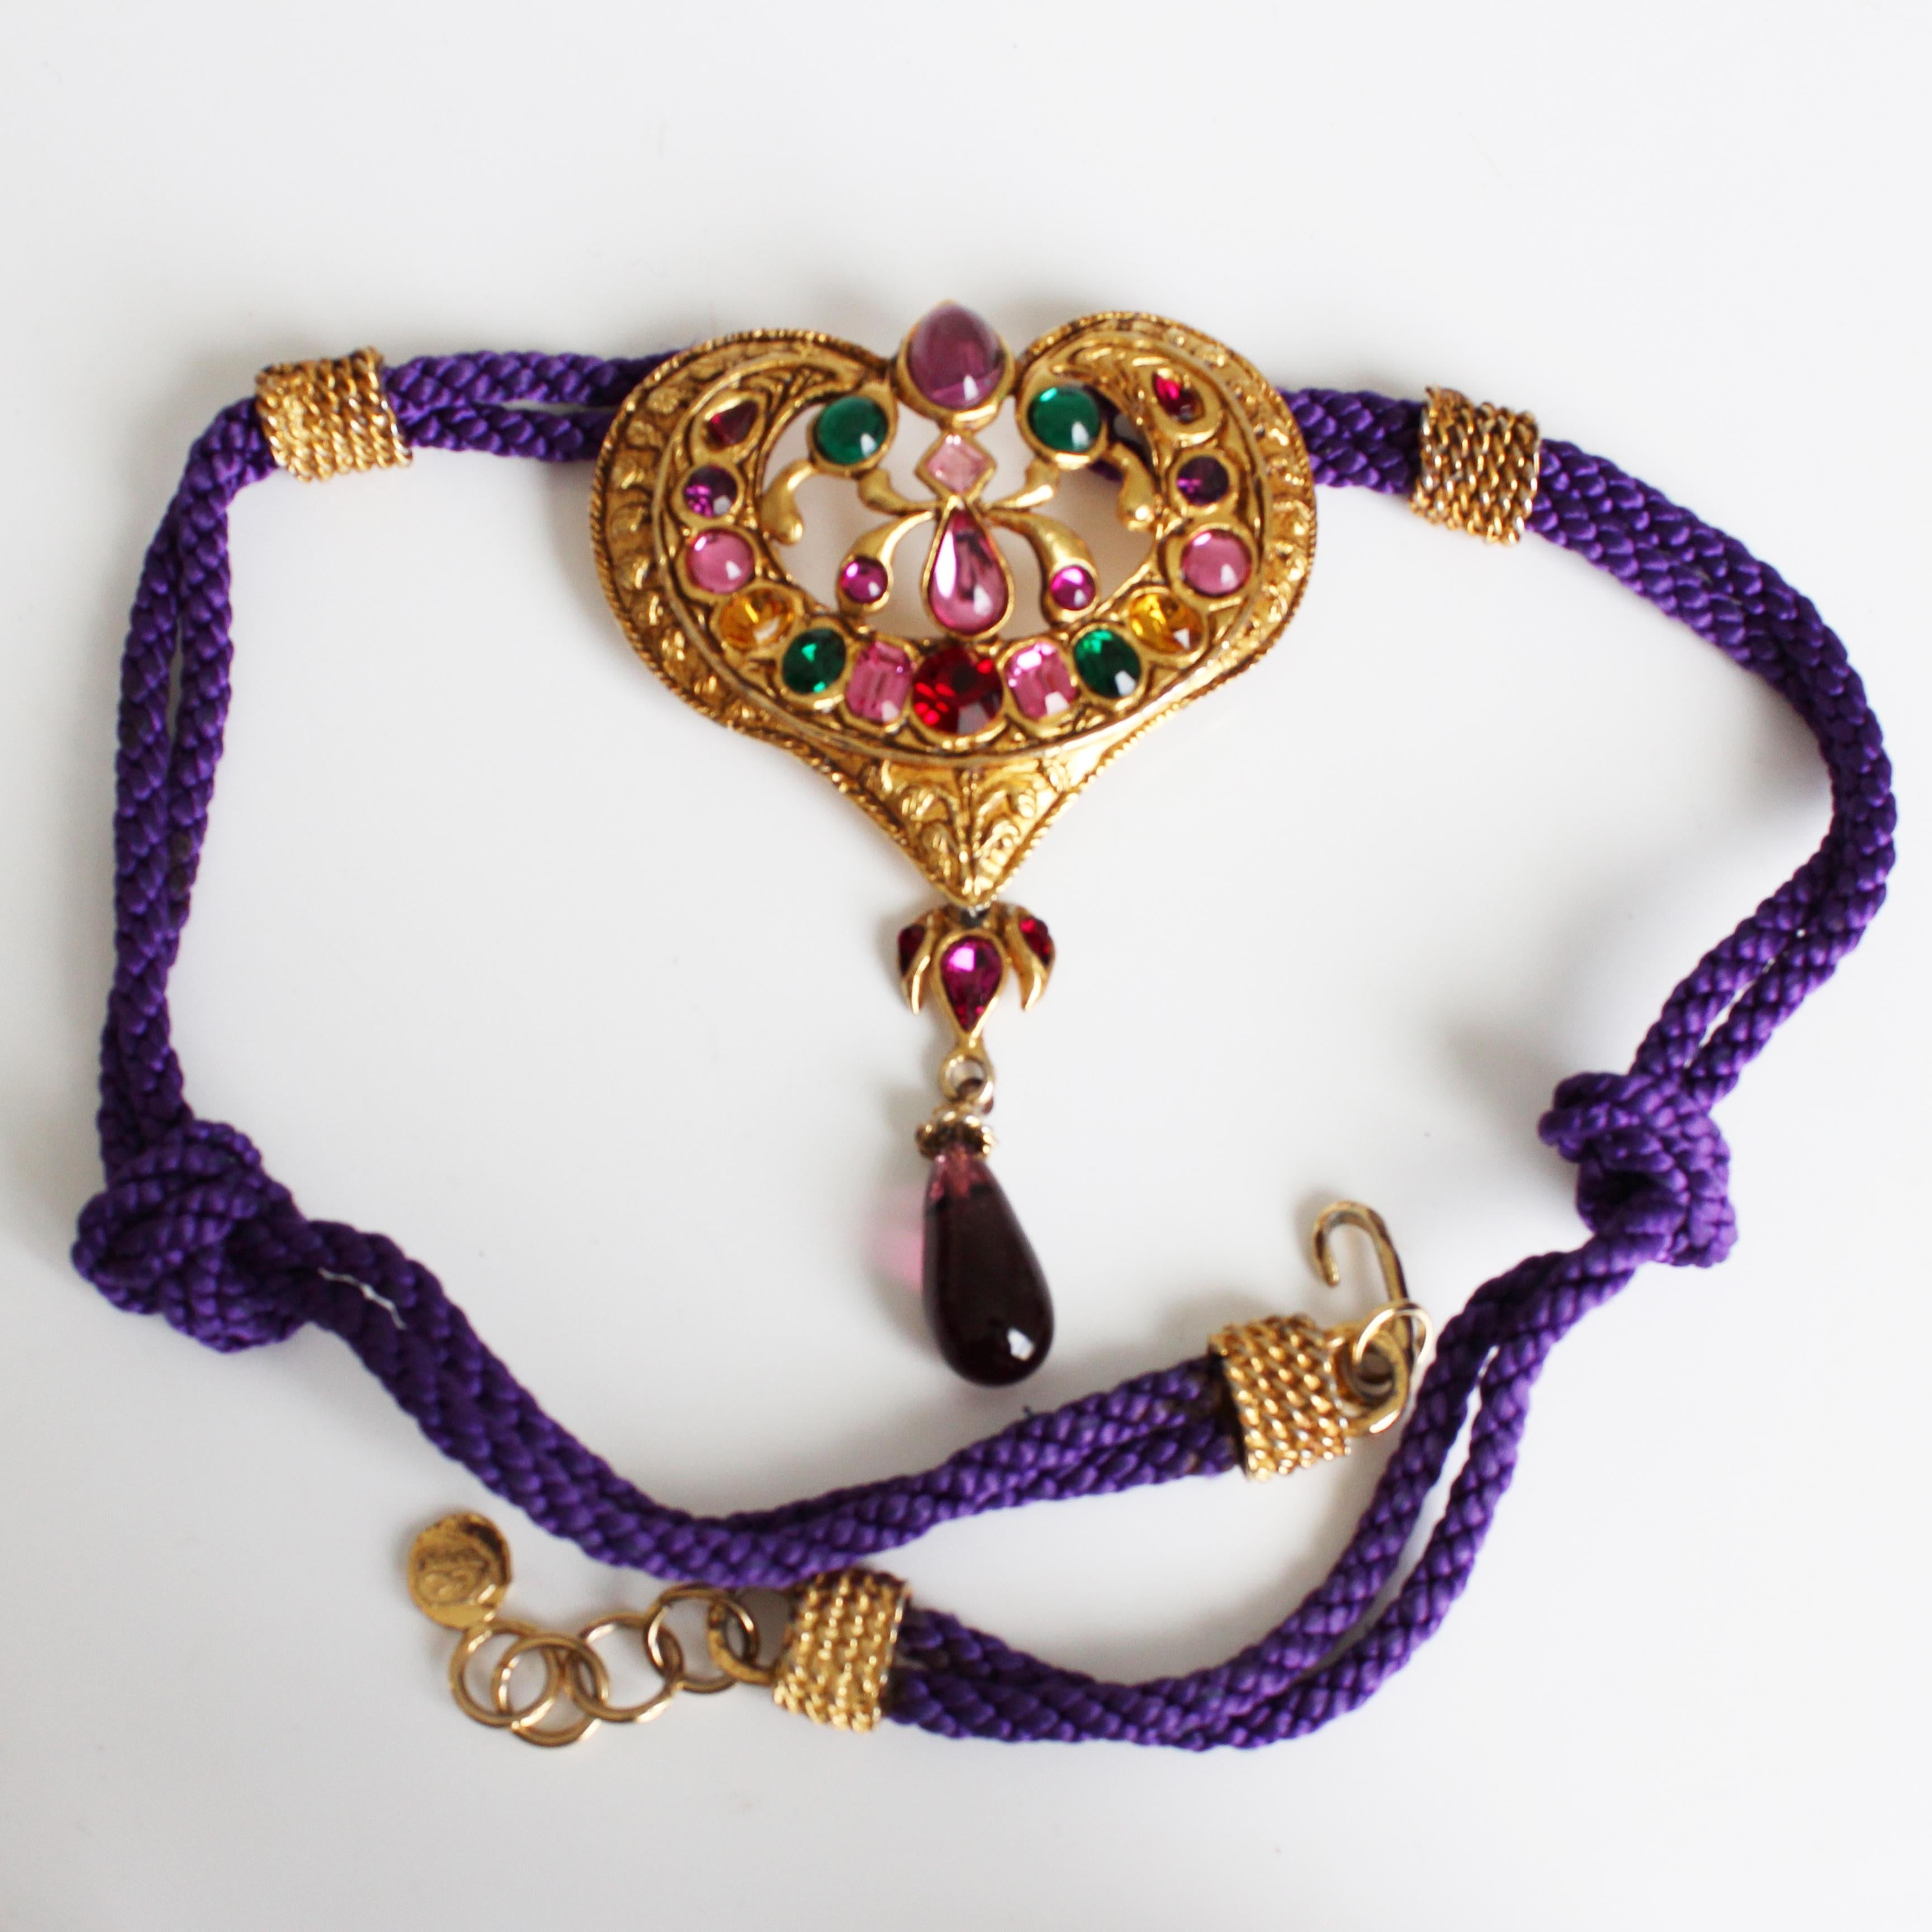 Preowned, authentic, vintage heart pendant necklace by Christian Lacroix, likely made in the 90s. A truly unique piece! It features a large 4.5in H gold metal heart with colorful glass stones & rhinestones. The necklace is fashioned from silky